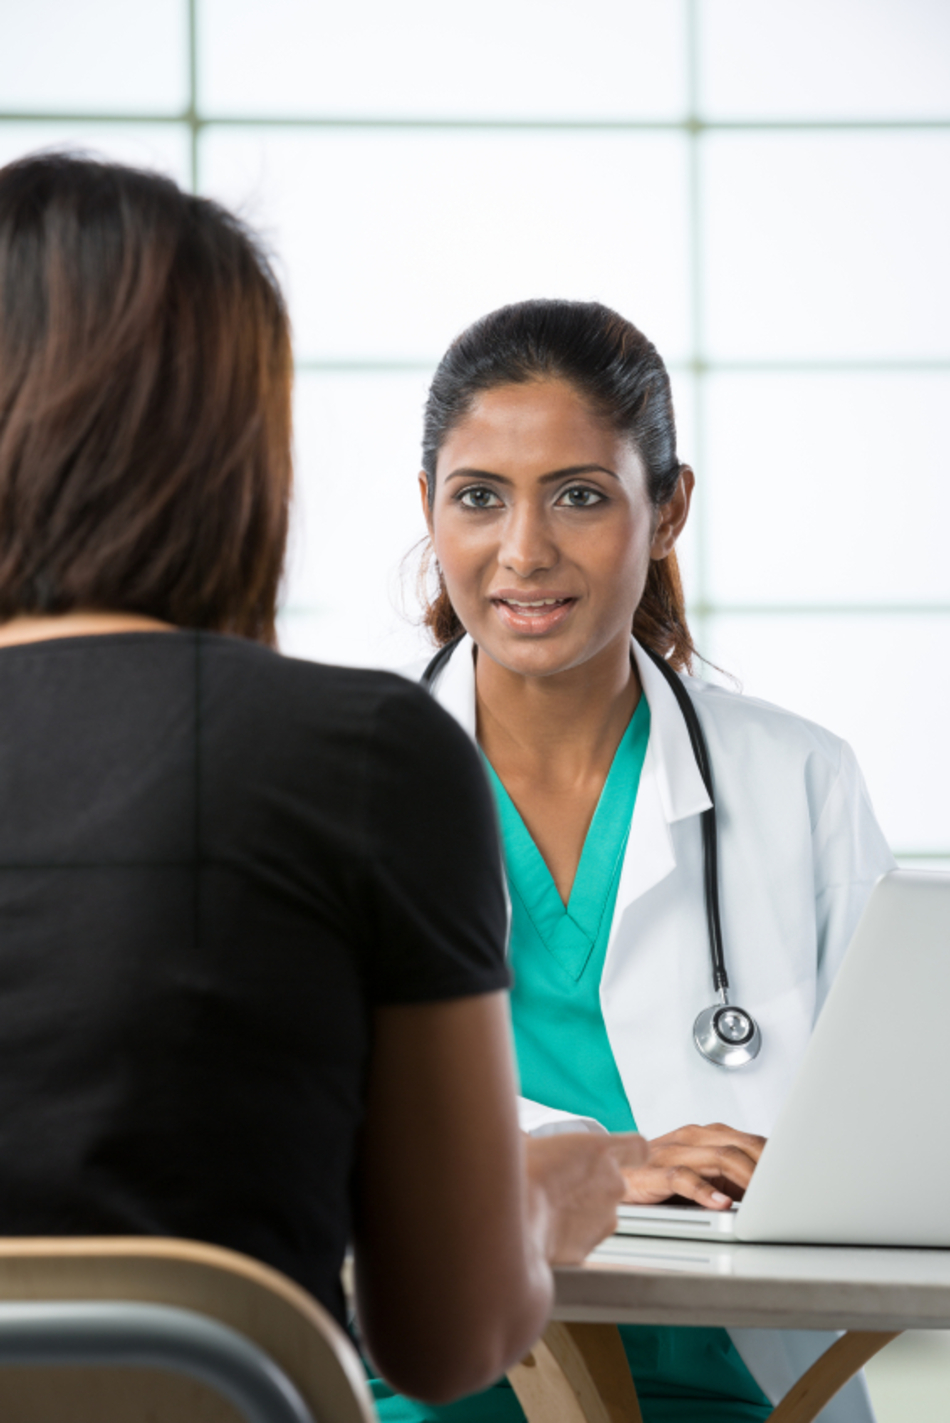 Confused by Your Doctor Visit? Ask These Three Questions